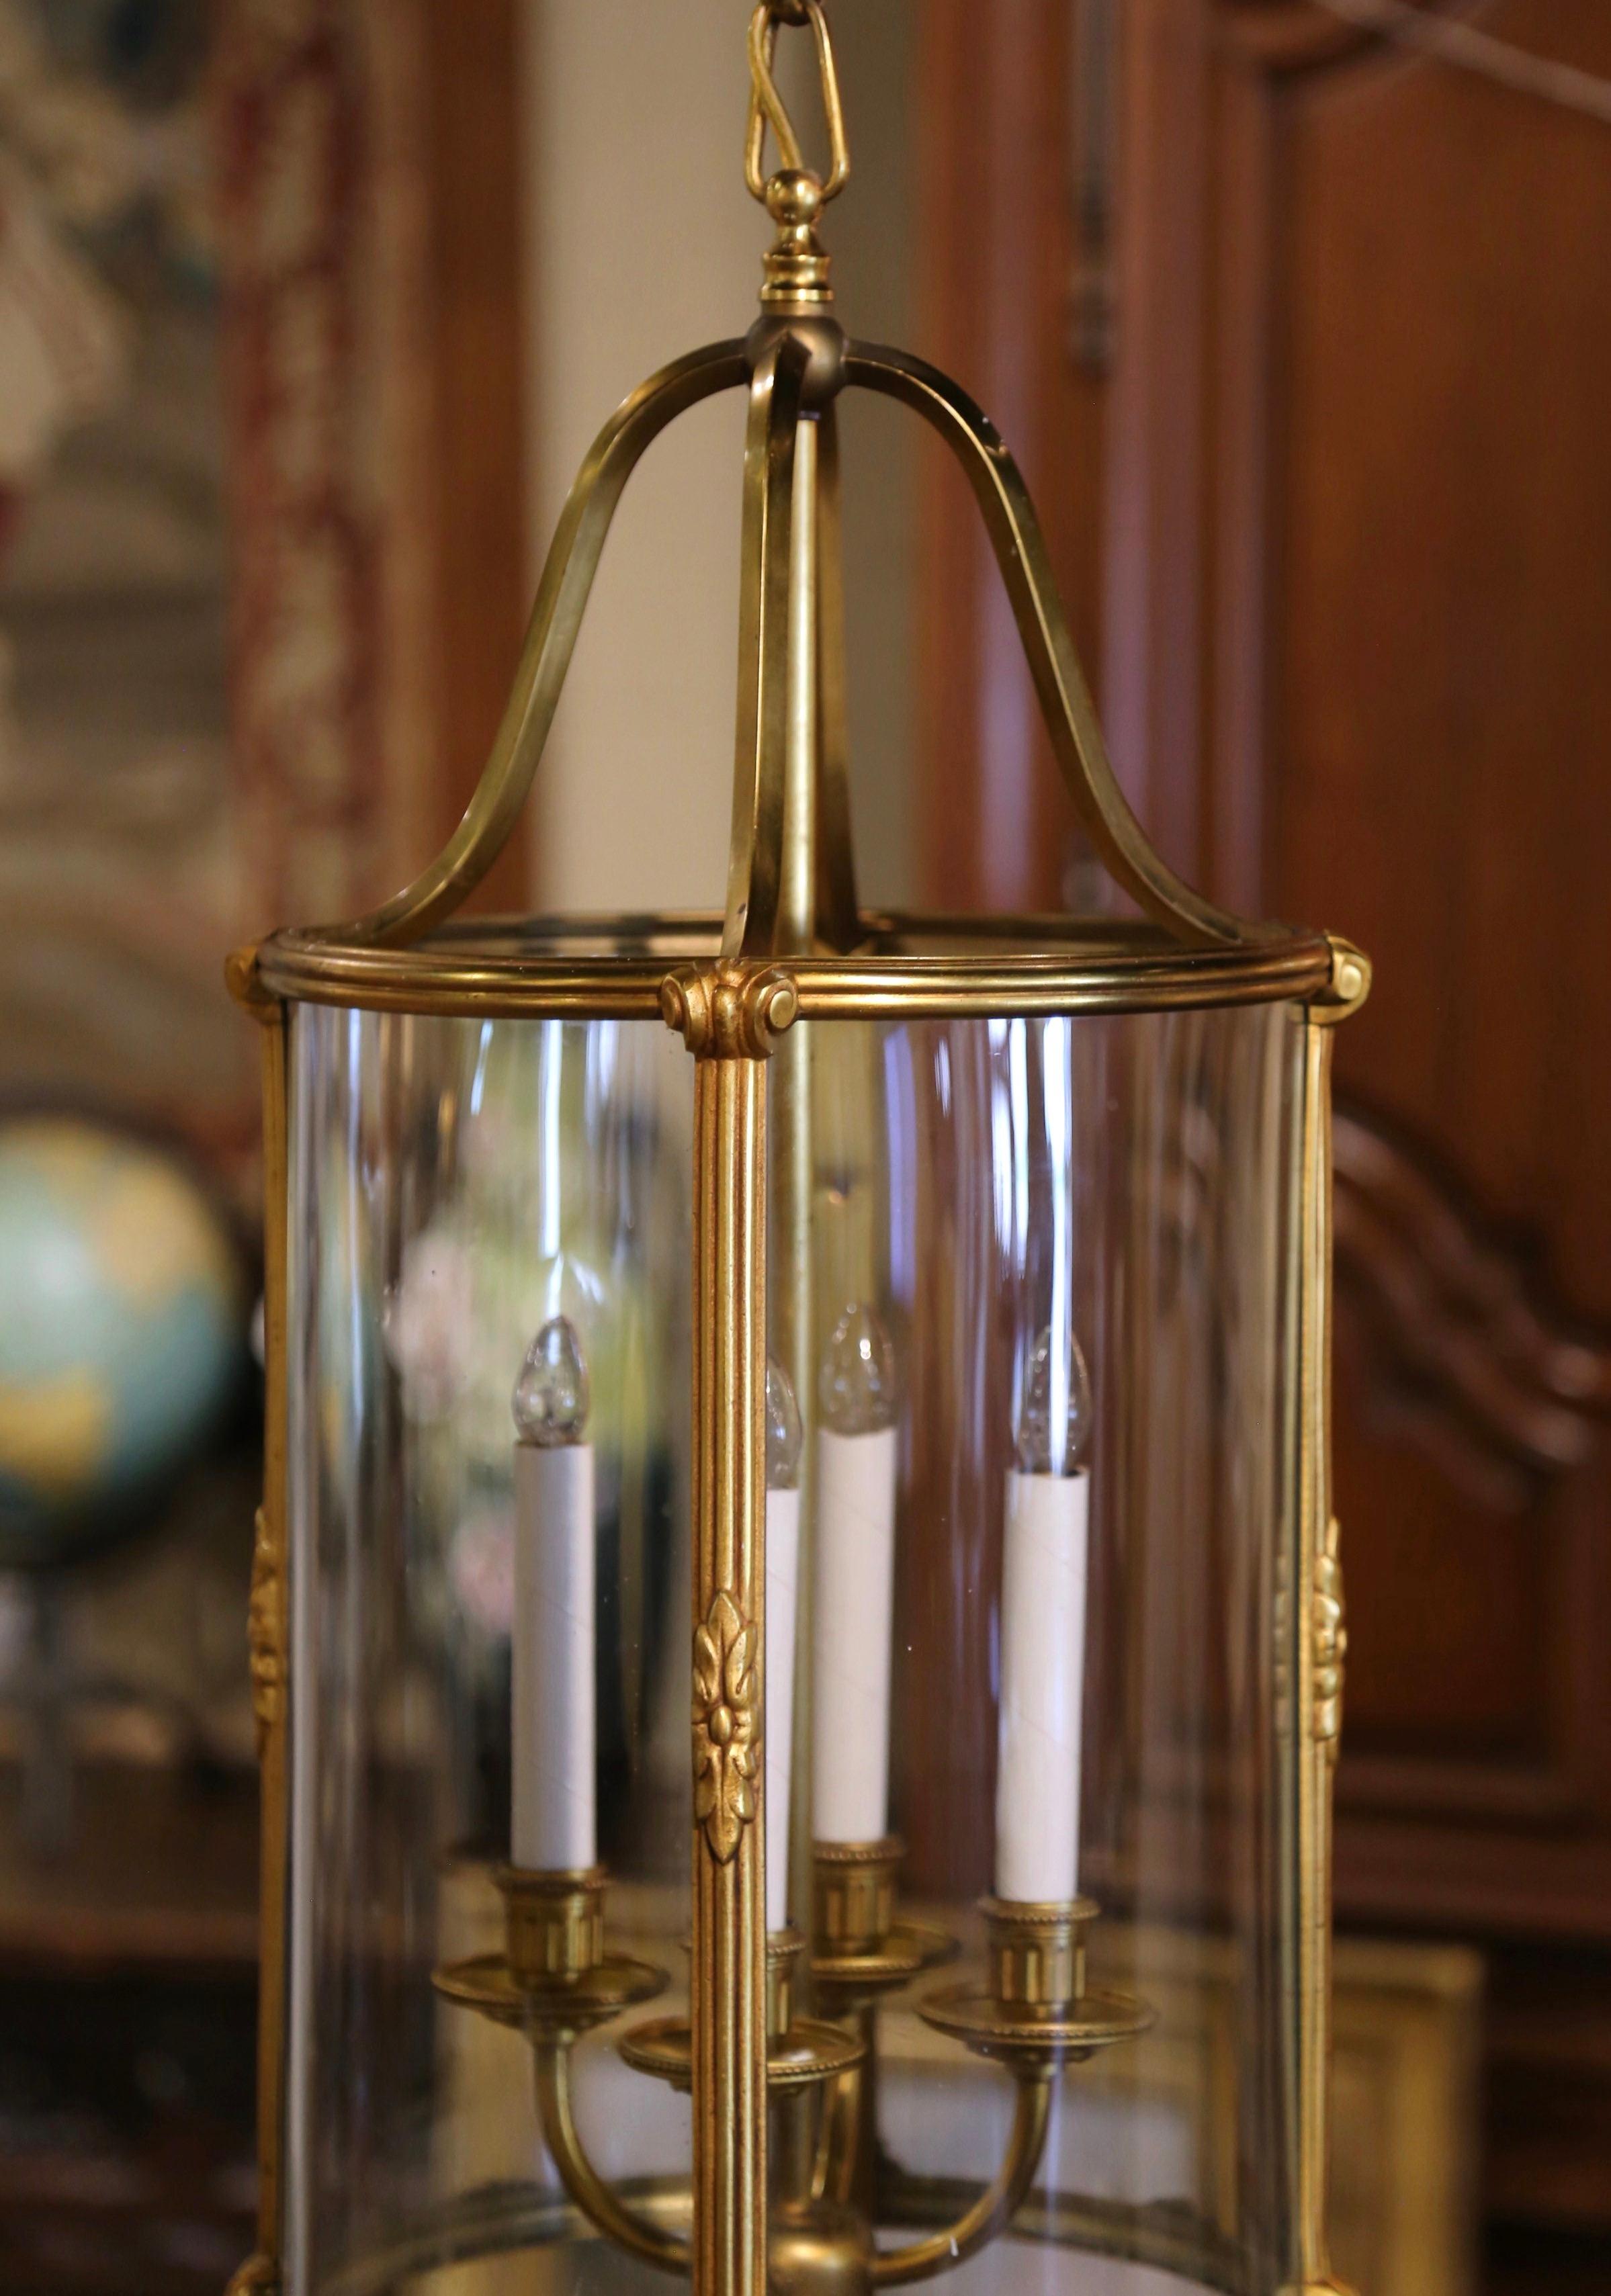 Light up your entryway with this elegant brass lantern fixture; crafted in France circa 1970, the tall round lantern is decorated with the four brass dividers decorated with foliage motifs and ending with a center finial at the base. The